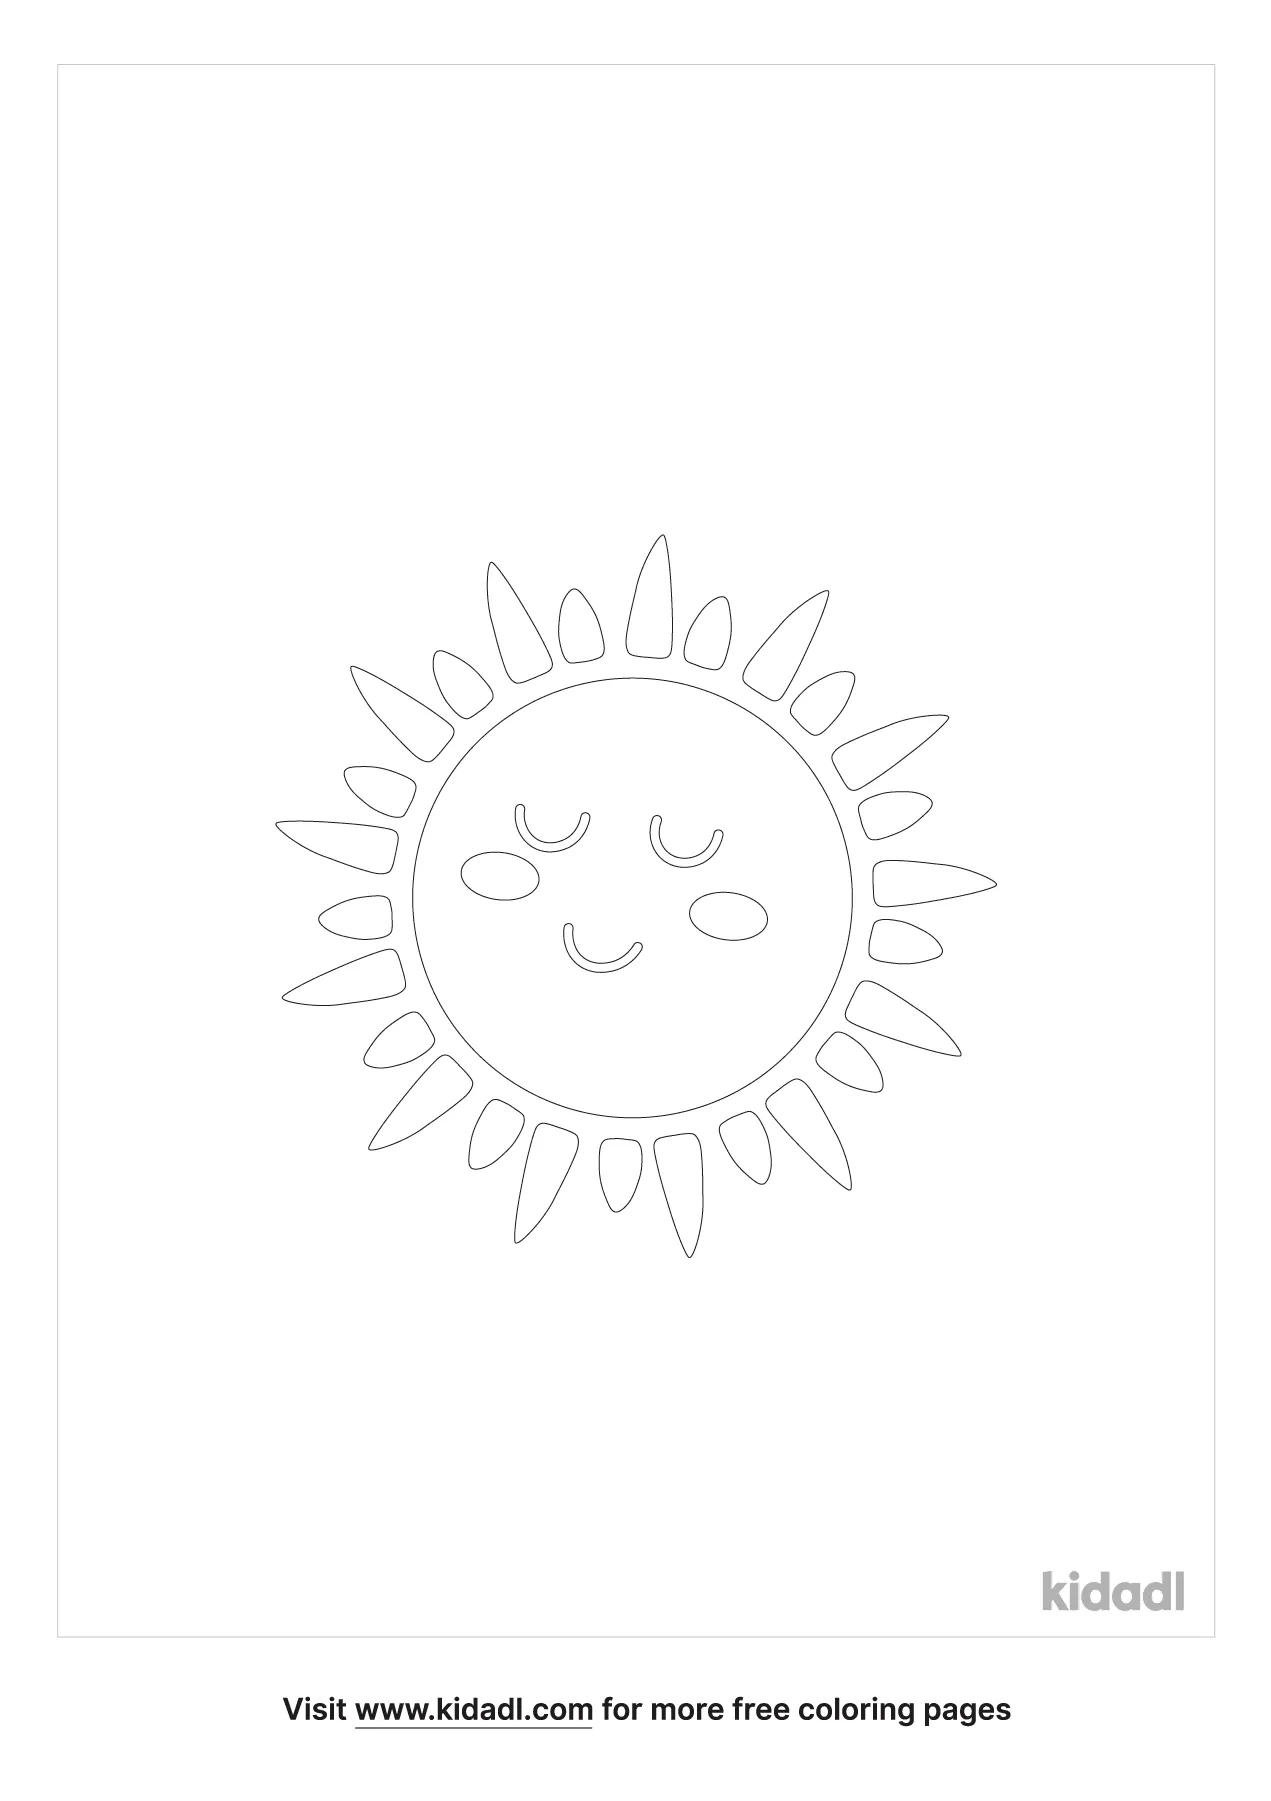 Summer Sunshine Coloring Page